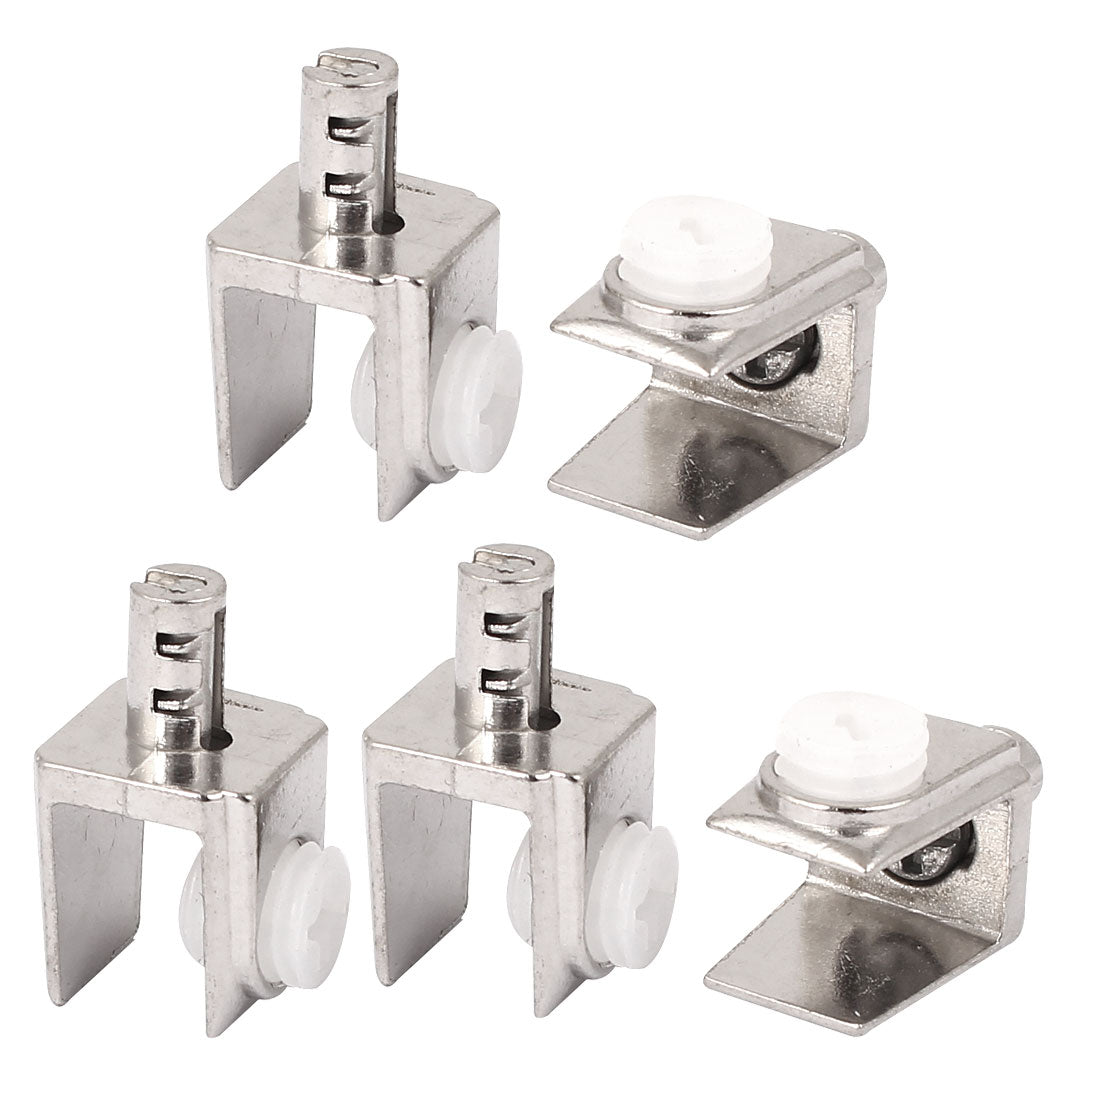 uxcell Uxcell 3mm-8mm Thickness Alloy Bathroom Shelf Glass Clip Clamp Bracket Support 5pcs